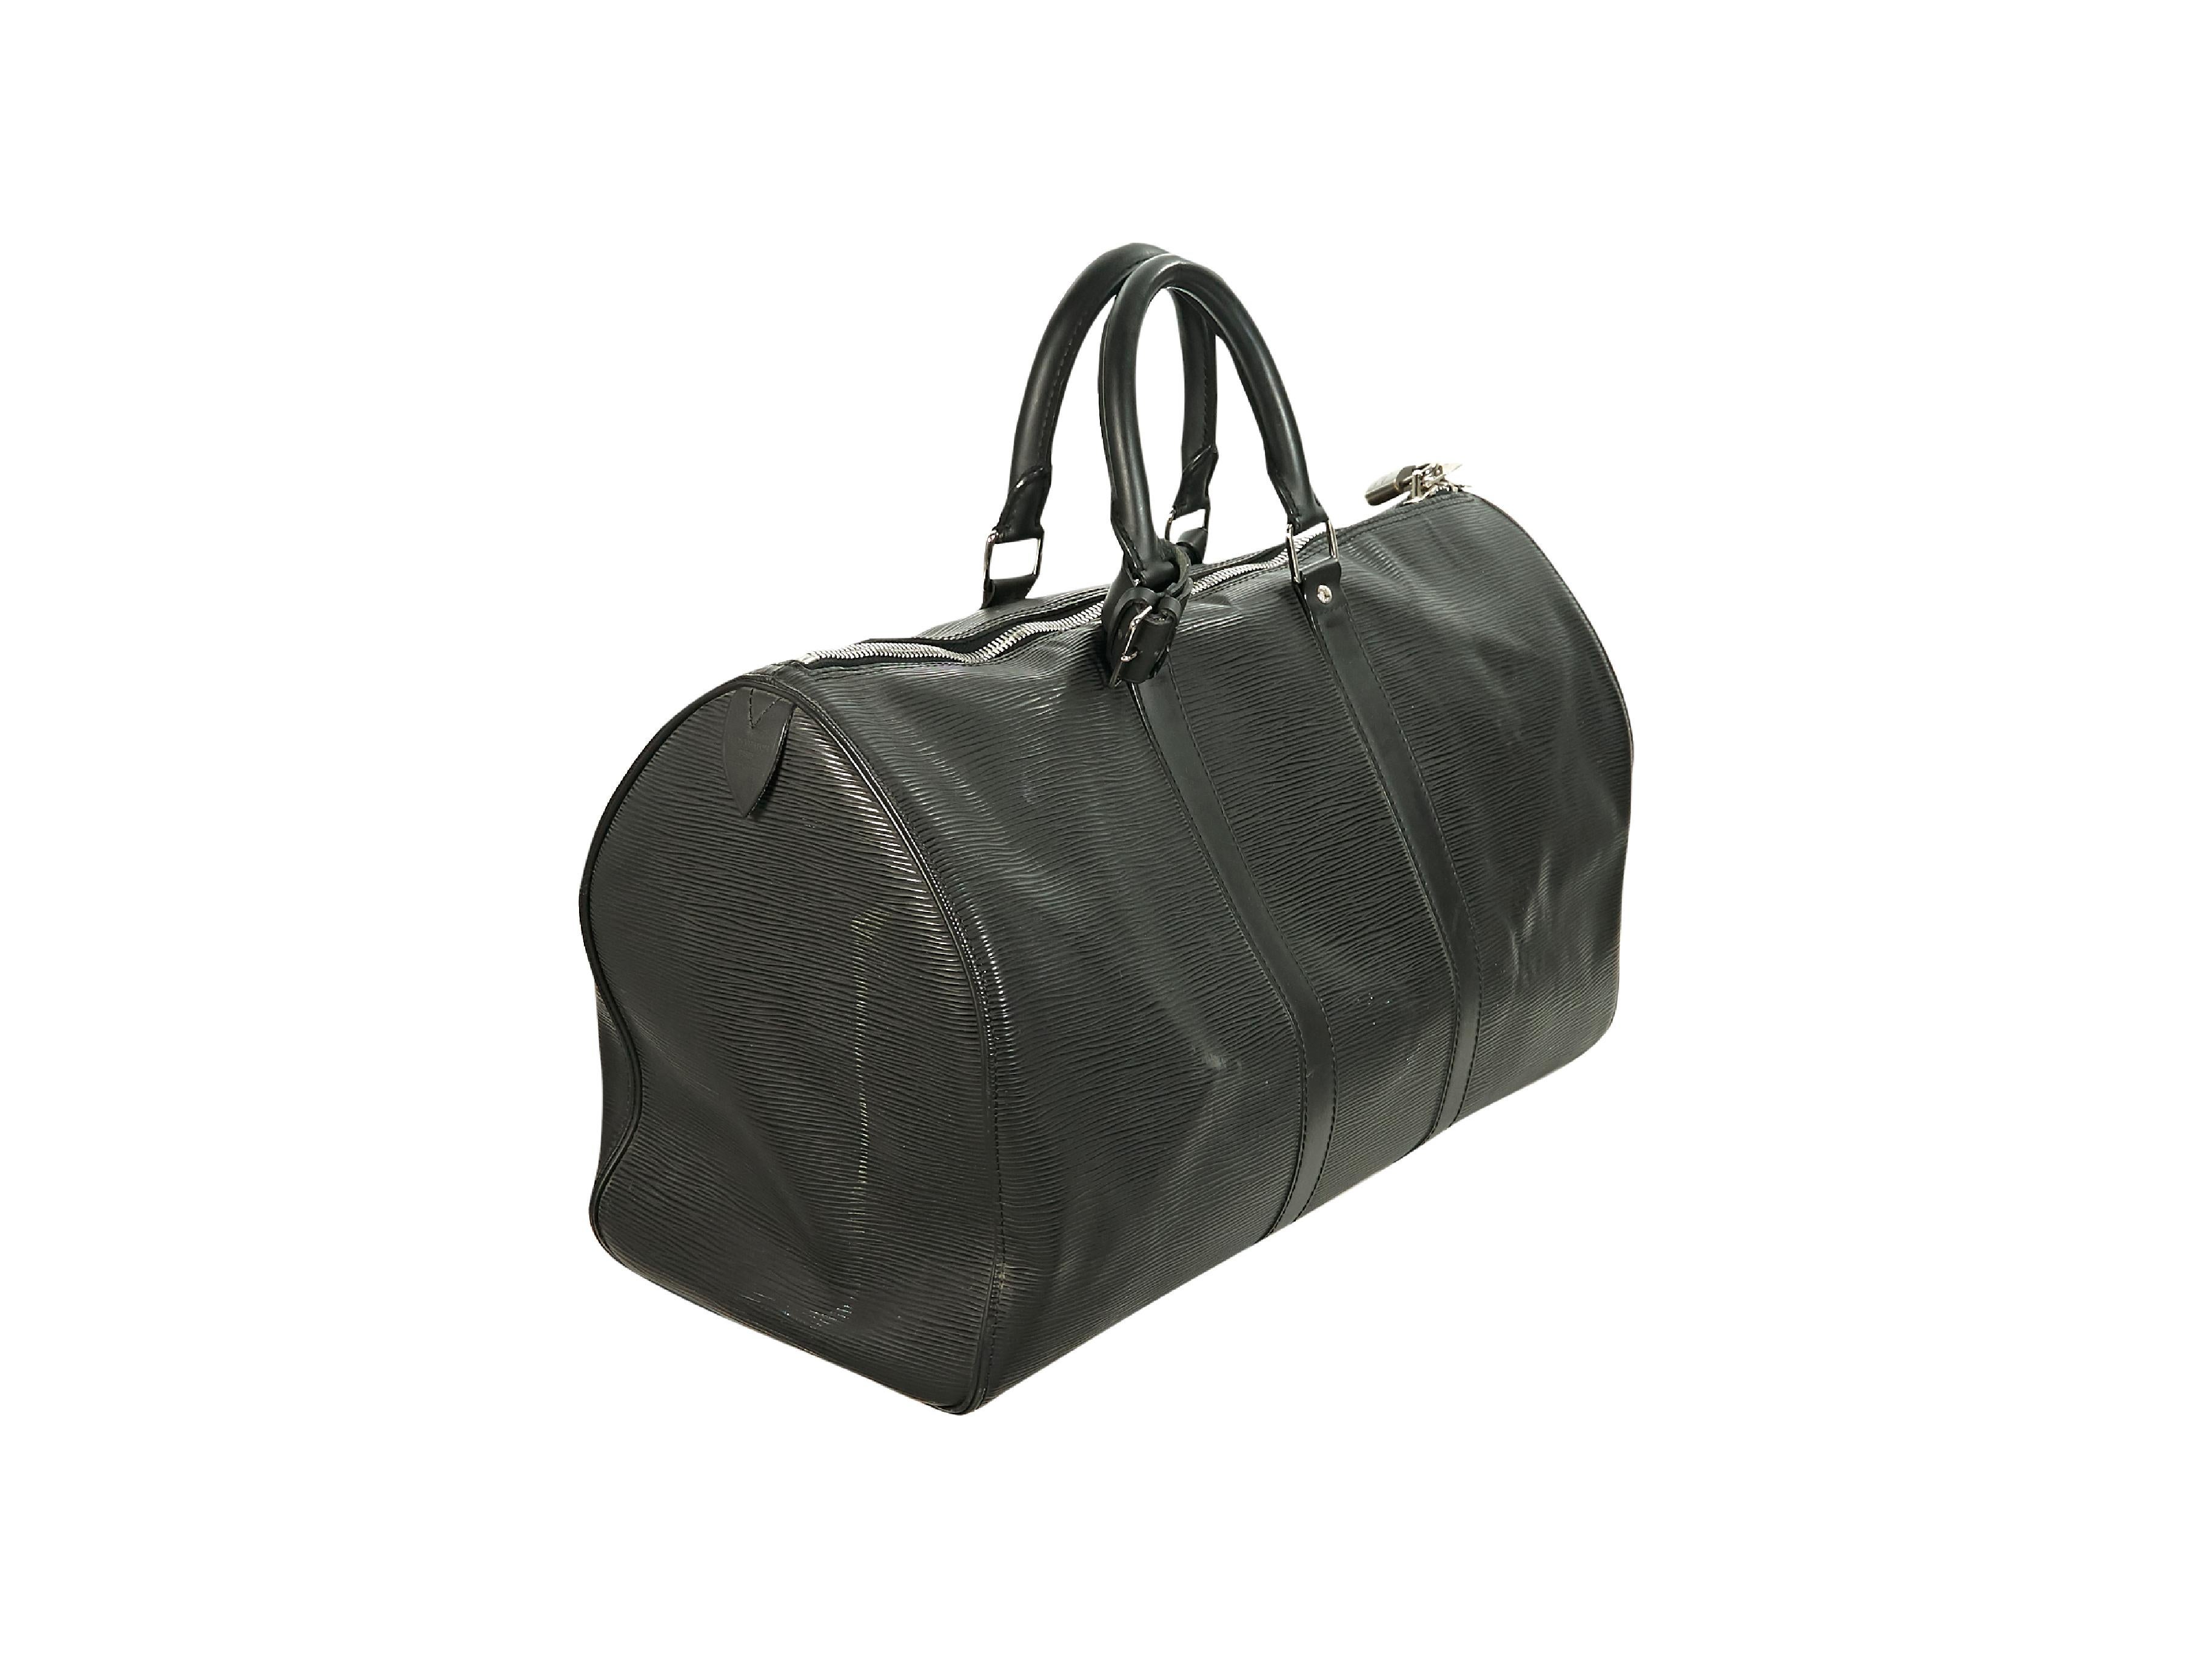 Product details:  Black epi leather Keepall 45 duffle bag by Louis Vuitton.  Dual carry handles.  Top zip closure.  Lined interior.  Exterior slide pocket.  Goldtone hardware.  18.5